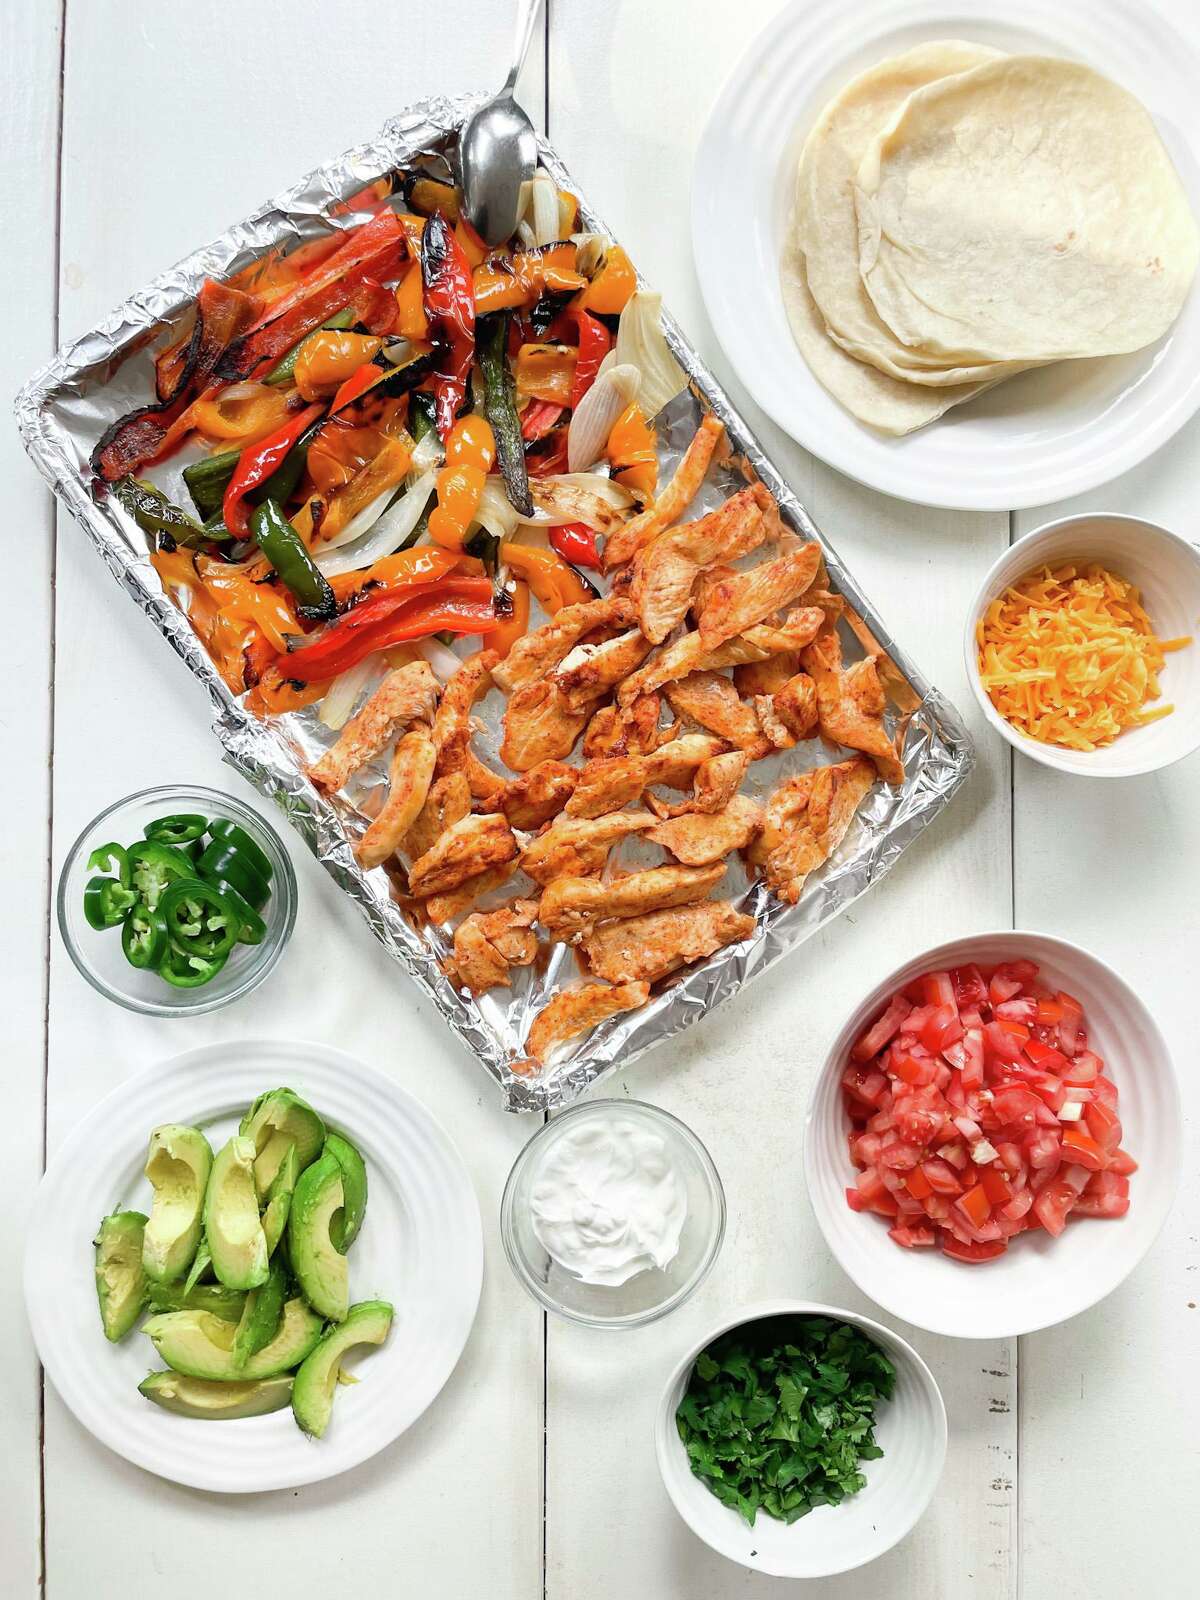 This sheetpan fajita dinner option will allow you to relax while dinner mostly fixes itself.